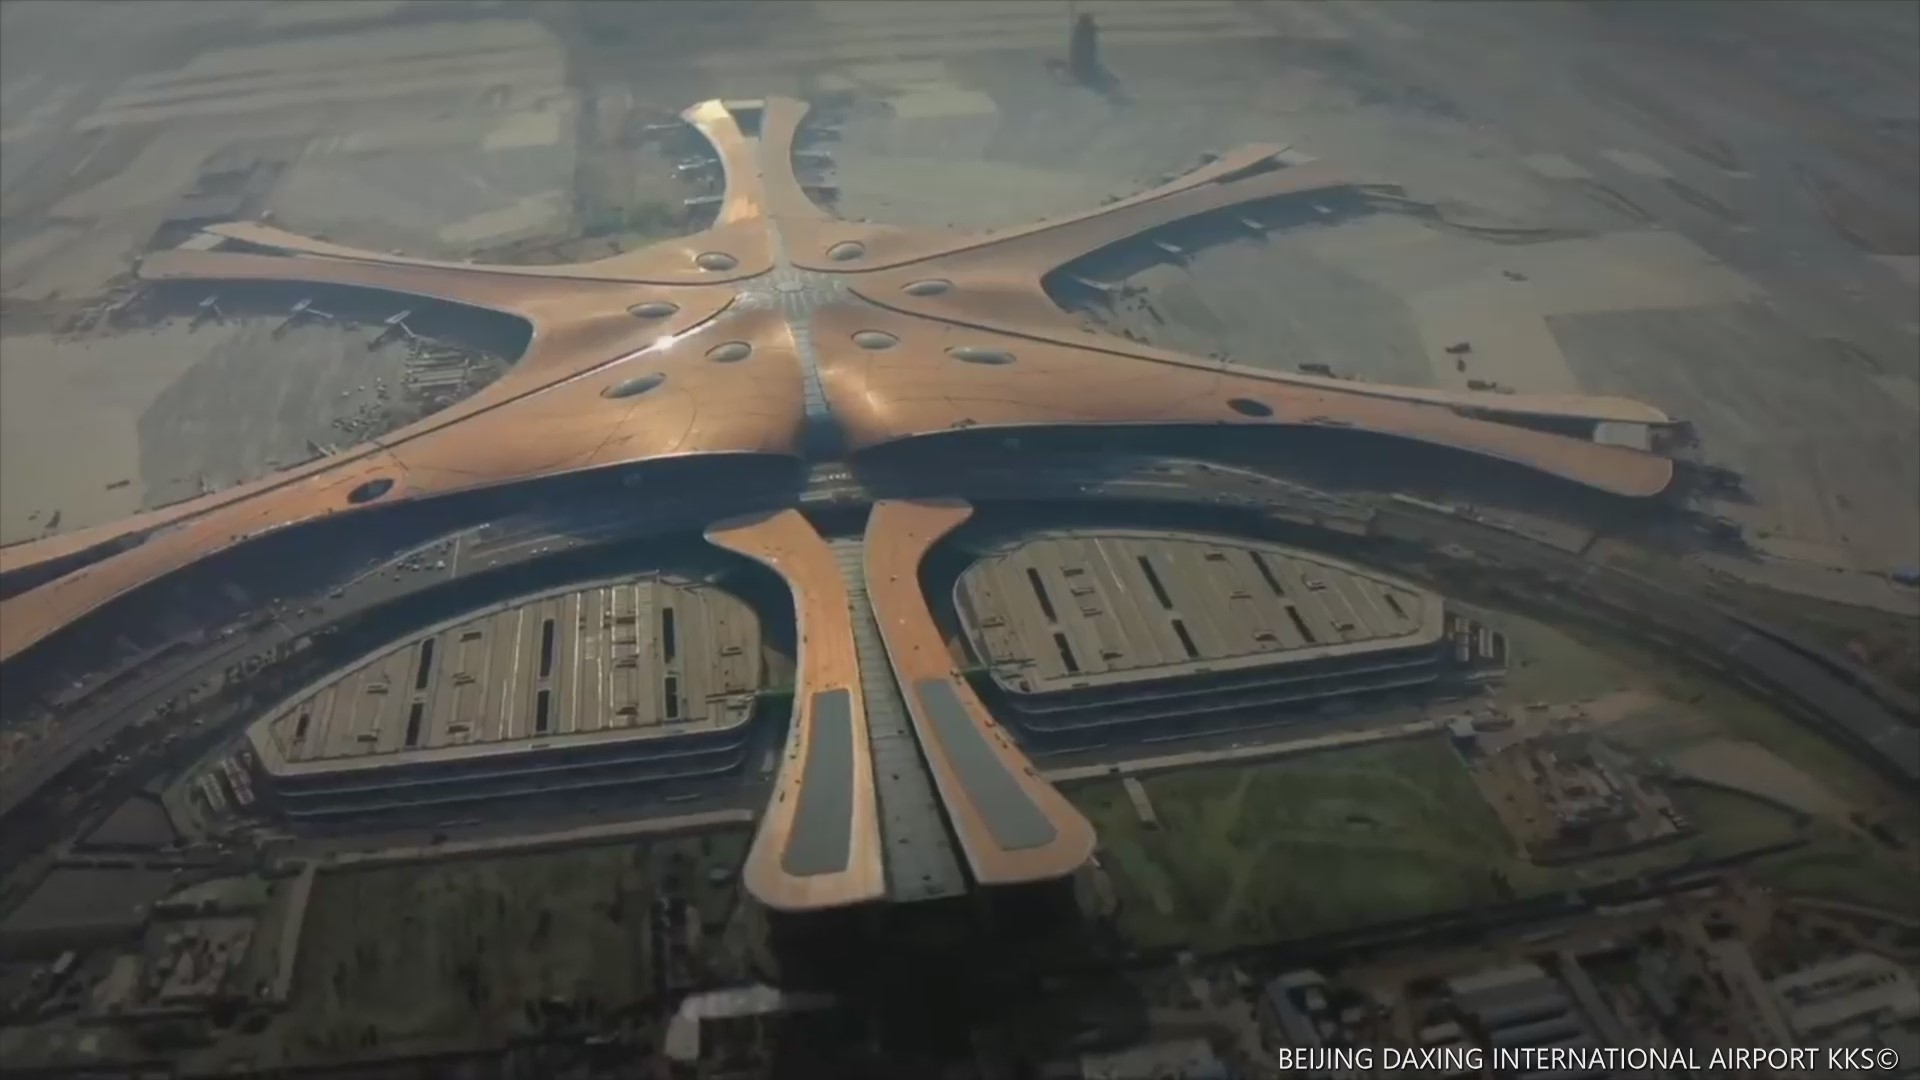 BEIJING DAXING INTERNATIONAL AIRPORT : THE BIGGEST AIRPORT IN THE WORLD